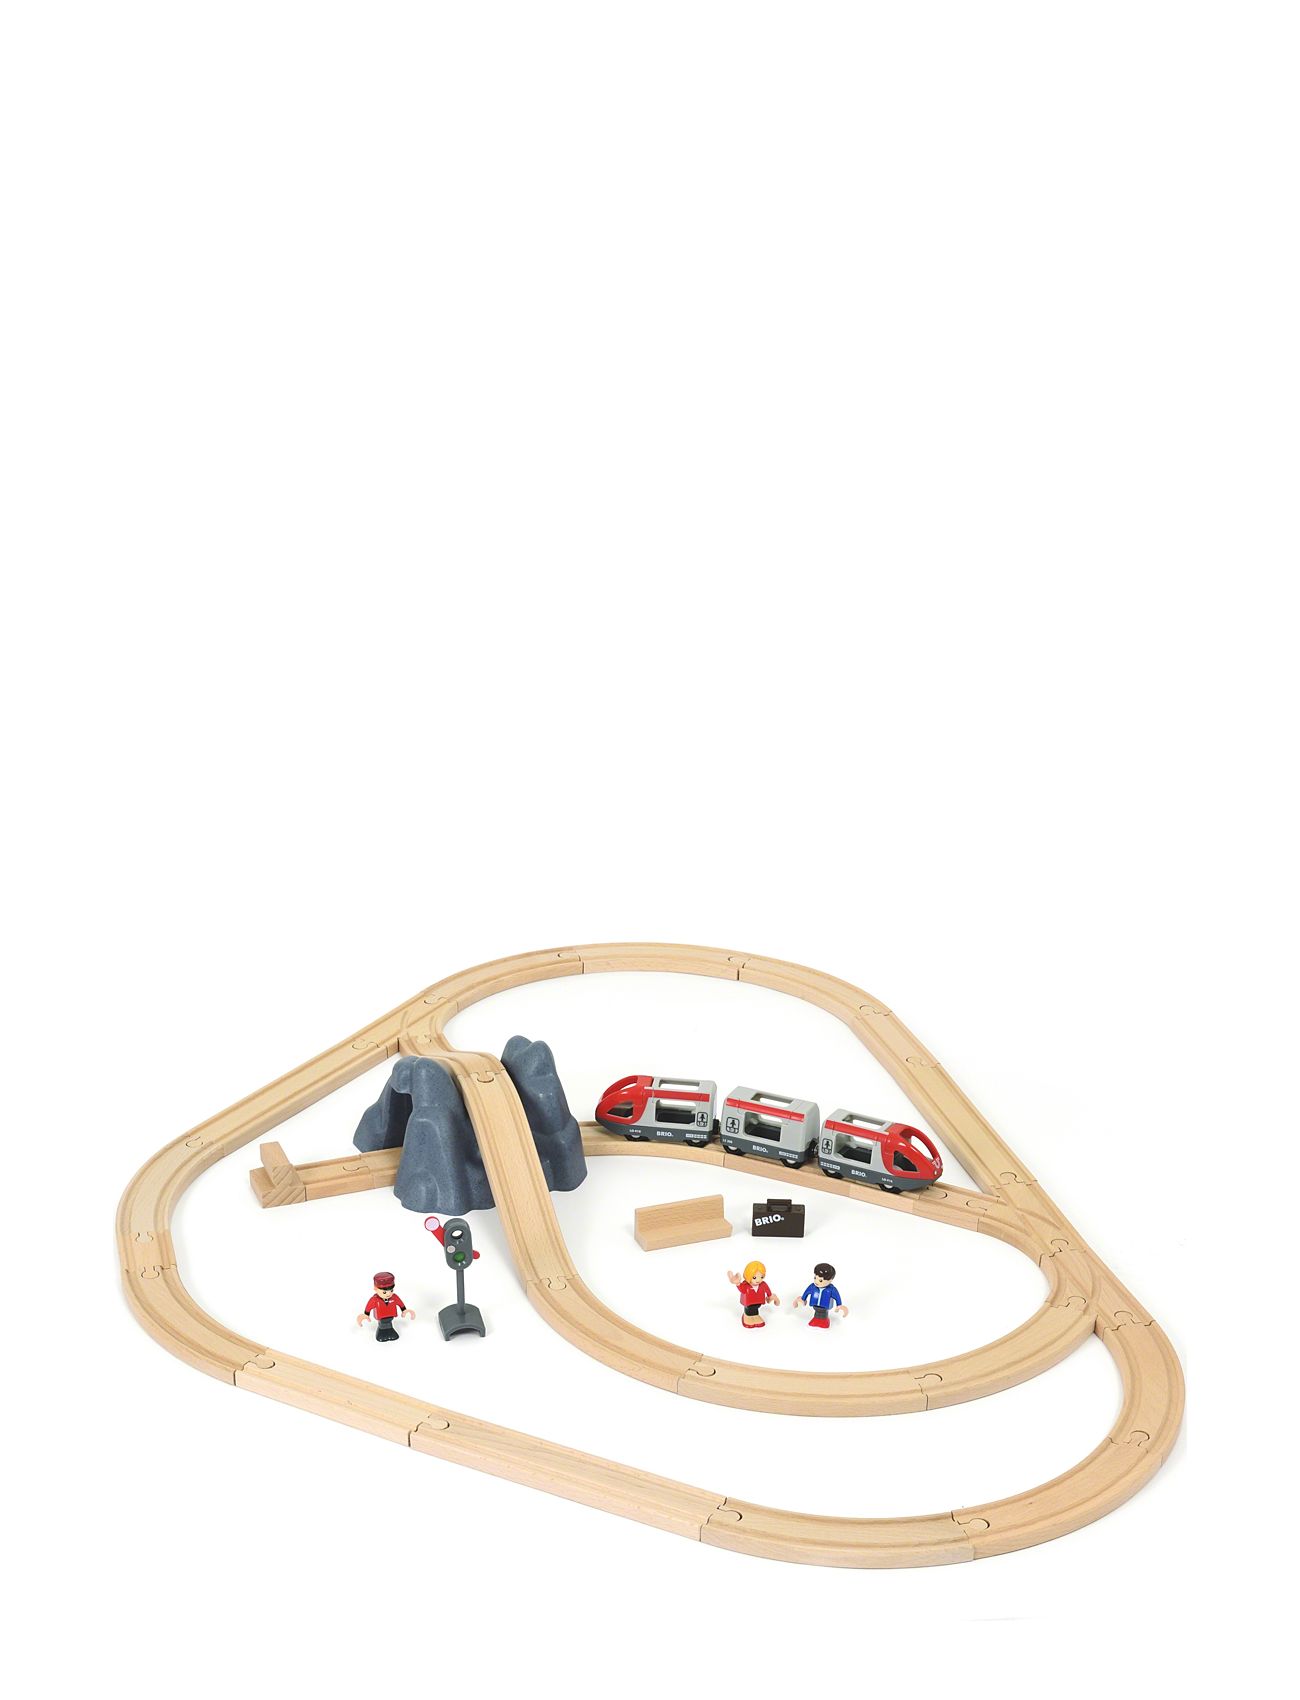 Brio 33773 Togbane, Startsæt M/Tog-Tilbeh. Toys Toy Cars & Vehicles Toy Vehicles Trains Multi/patterned BRIO